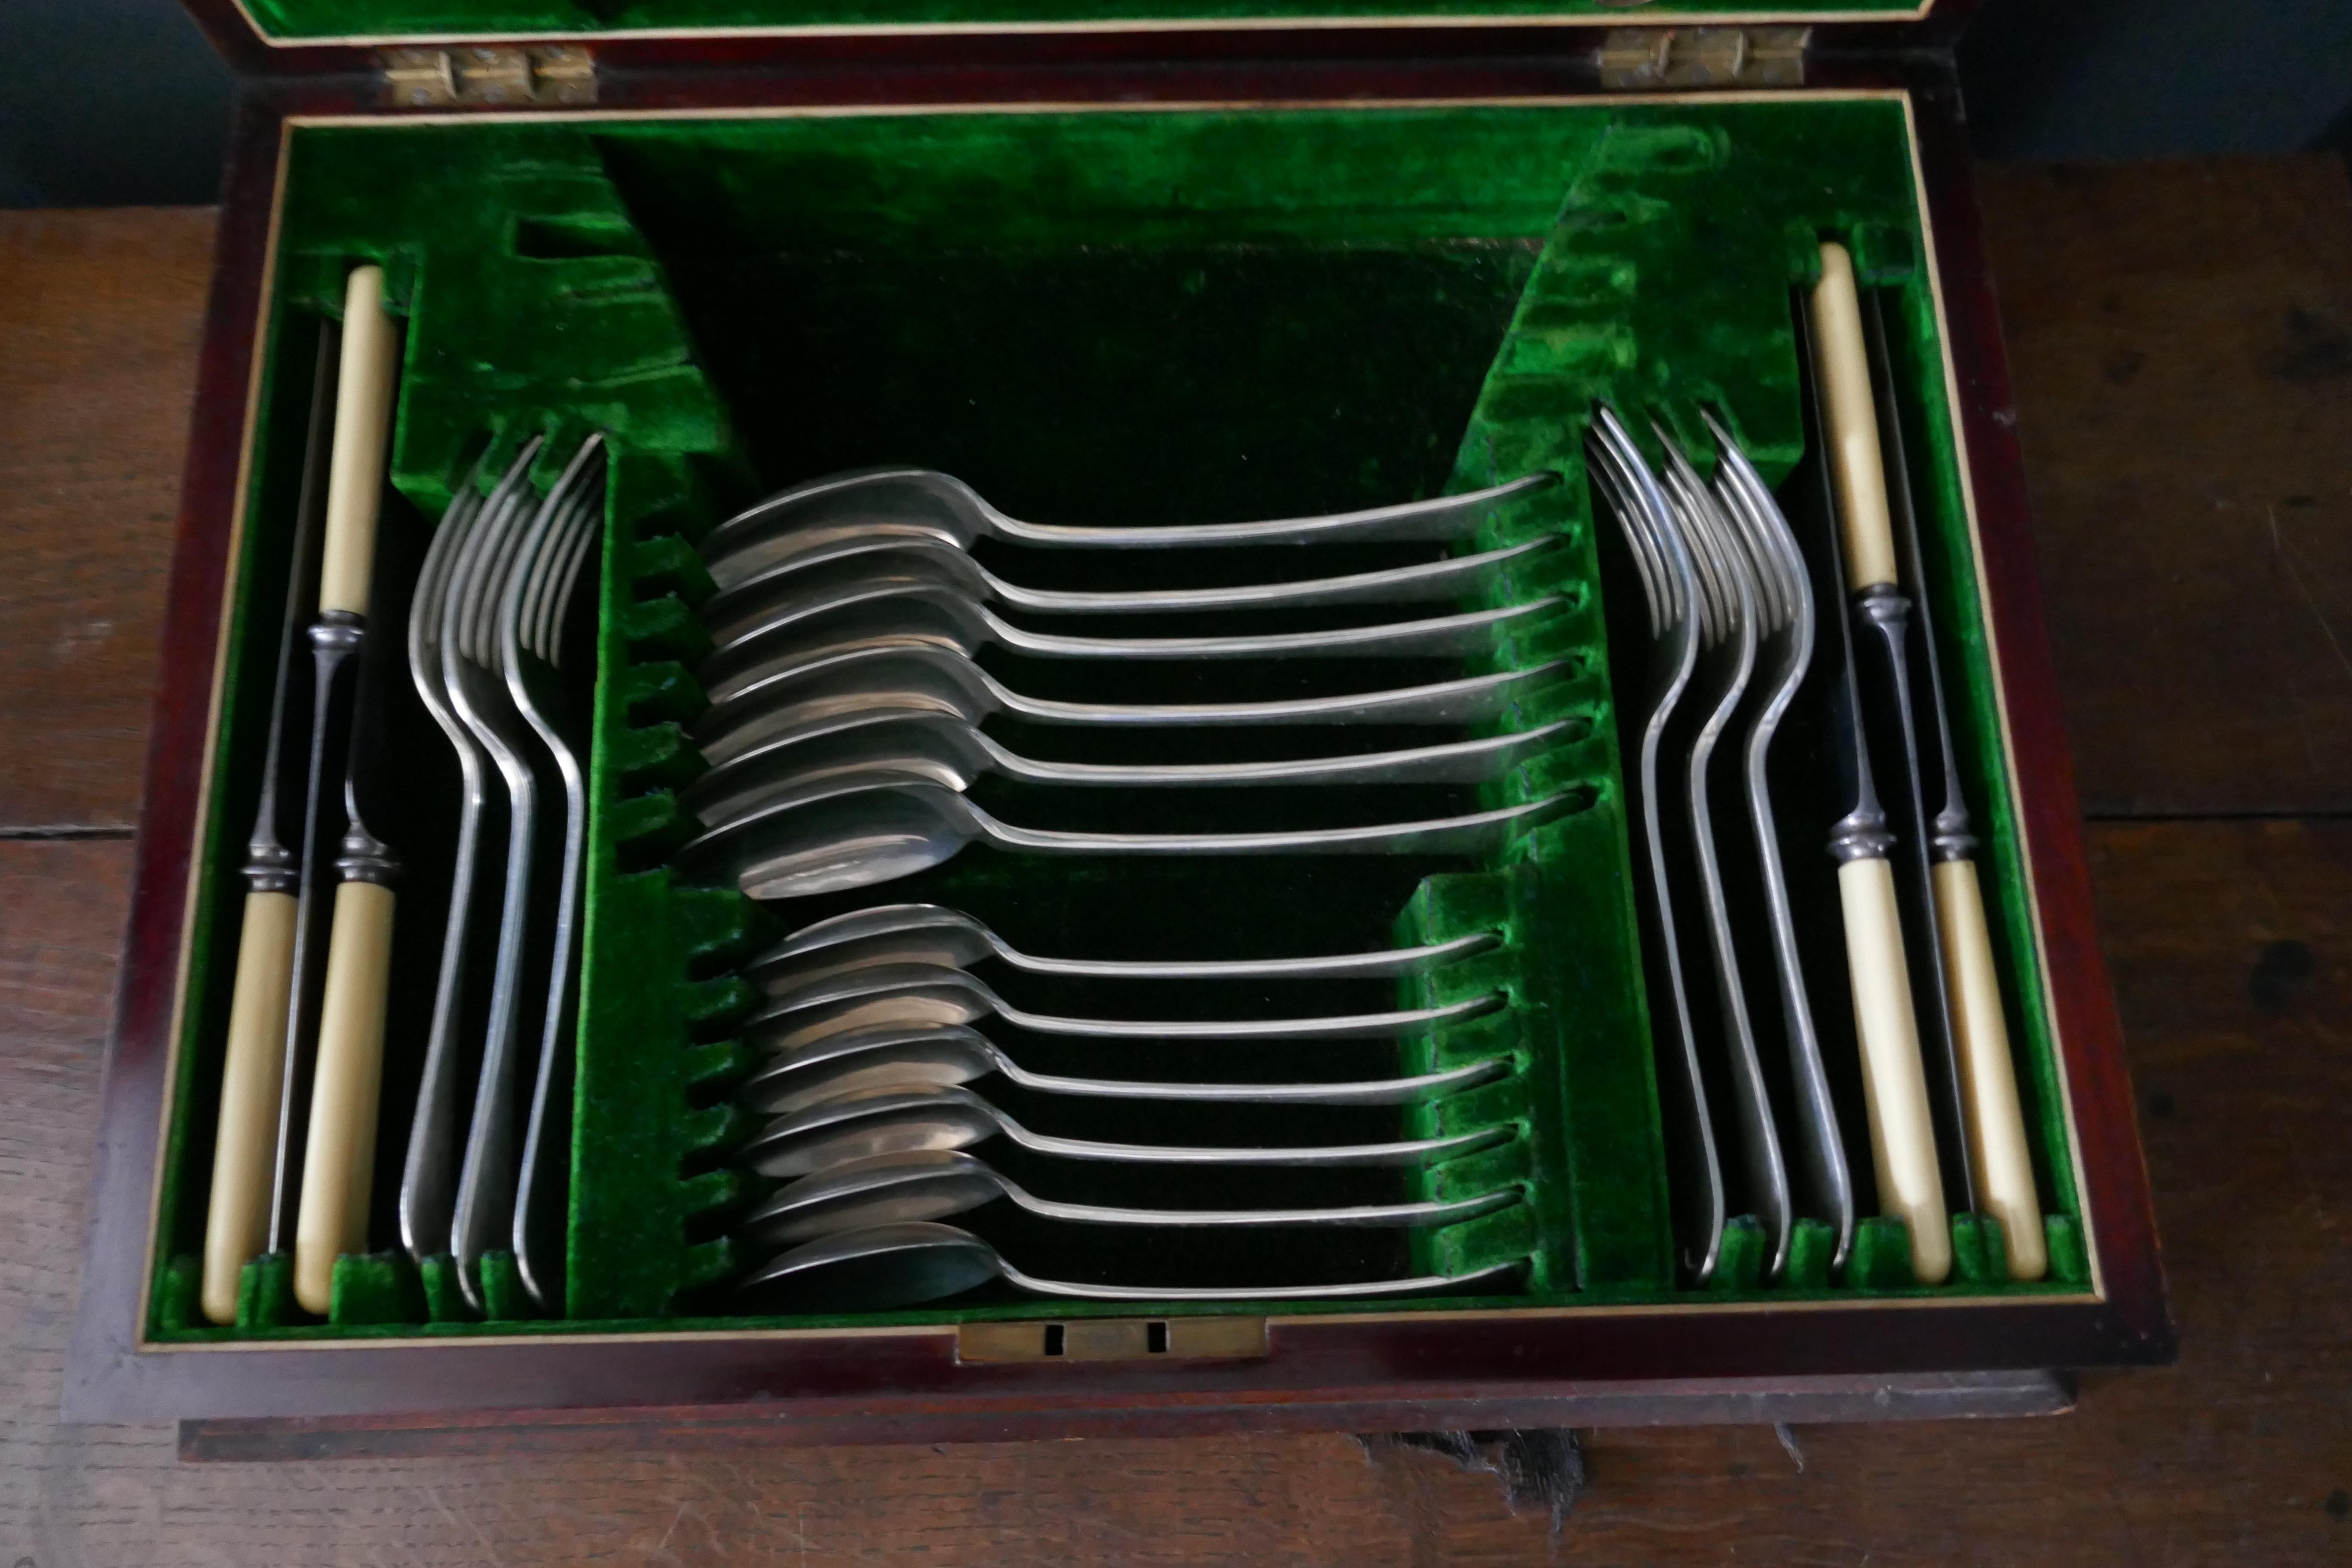 Edwardian mahogany cutlery canteen, James Deakin.

This is a good mahogany canteen, dating from circa 1900
There are in the box from the James Deakin set 6 dinner knives, 5 forks (also a replacement matching fork), 6 desert spoons and 6 table